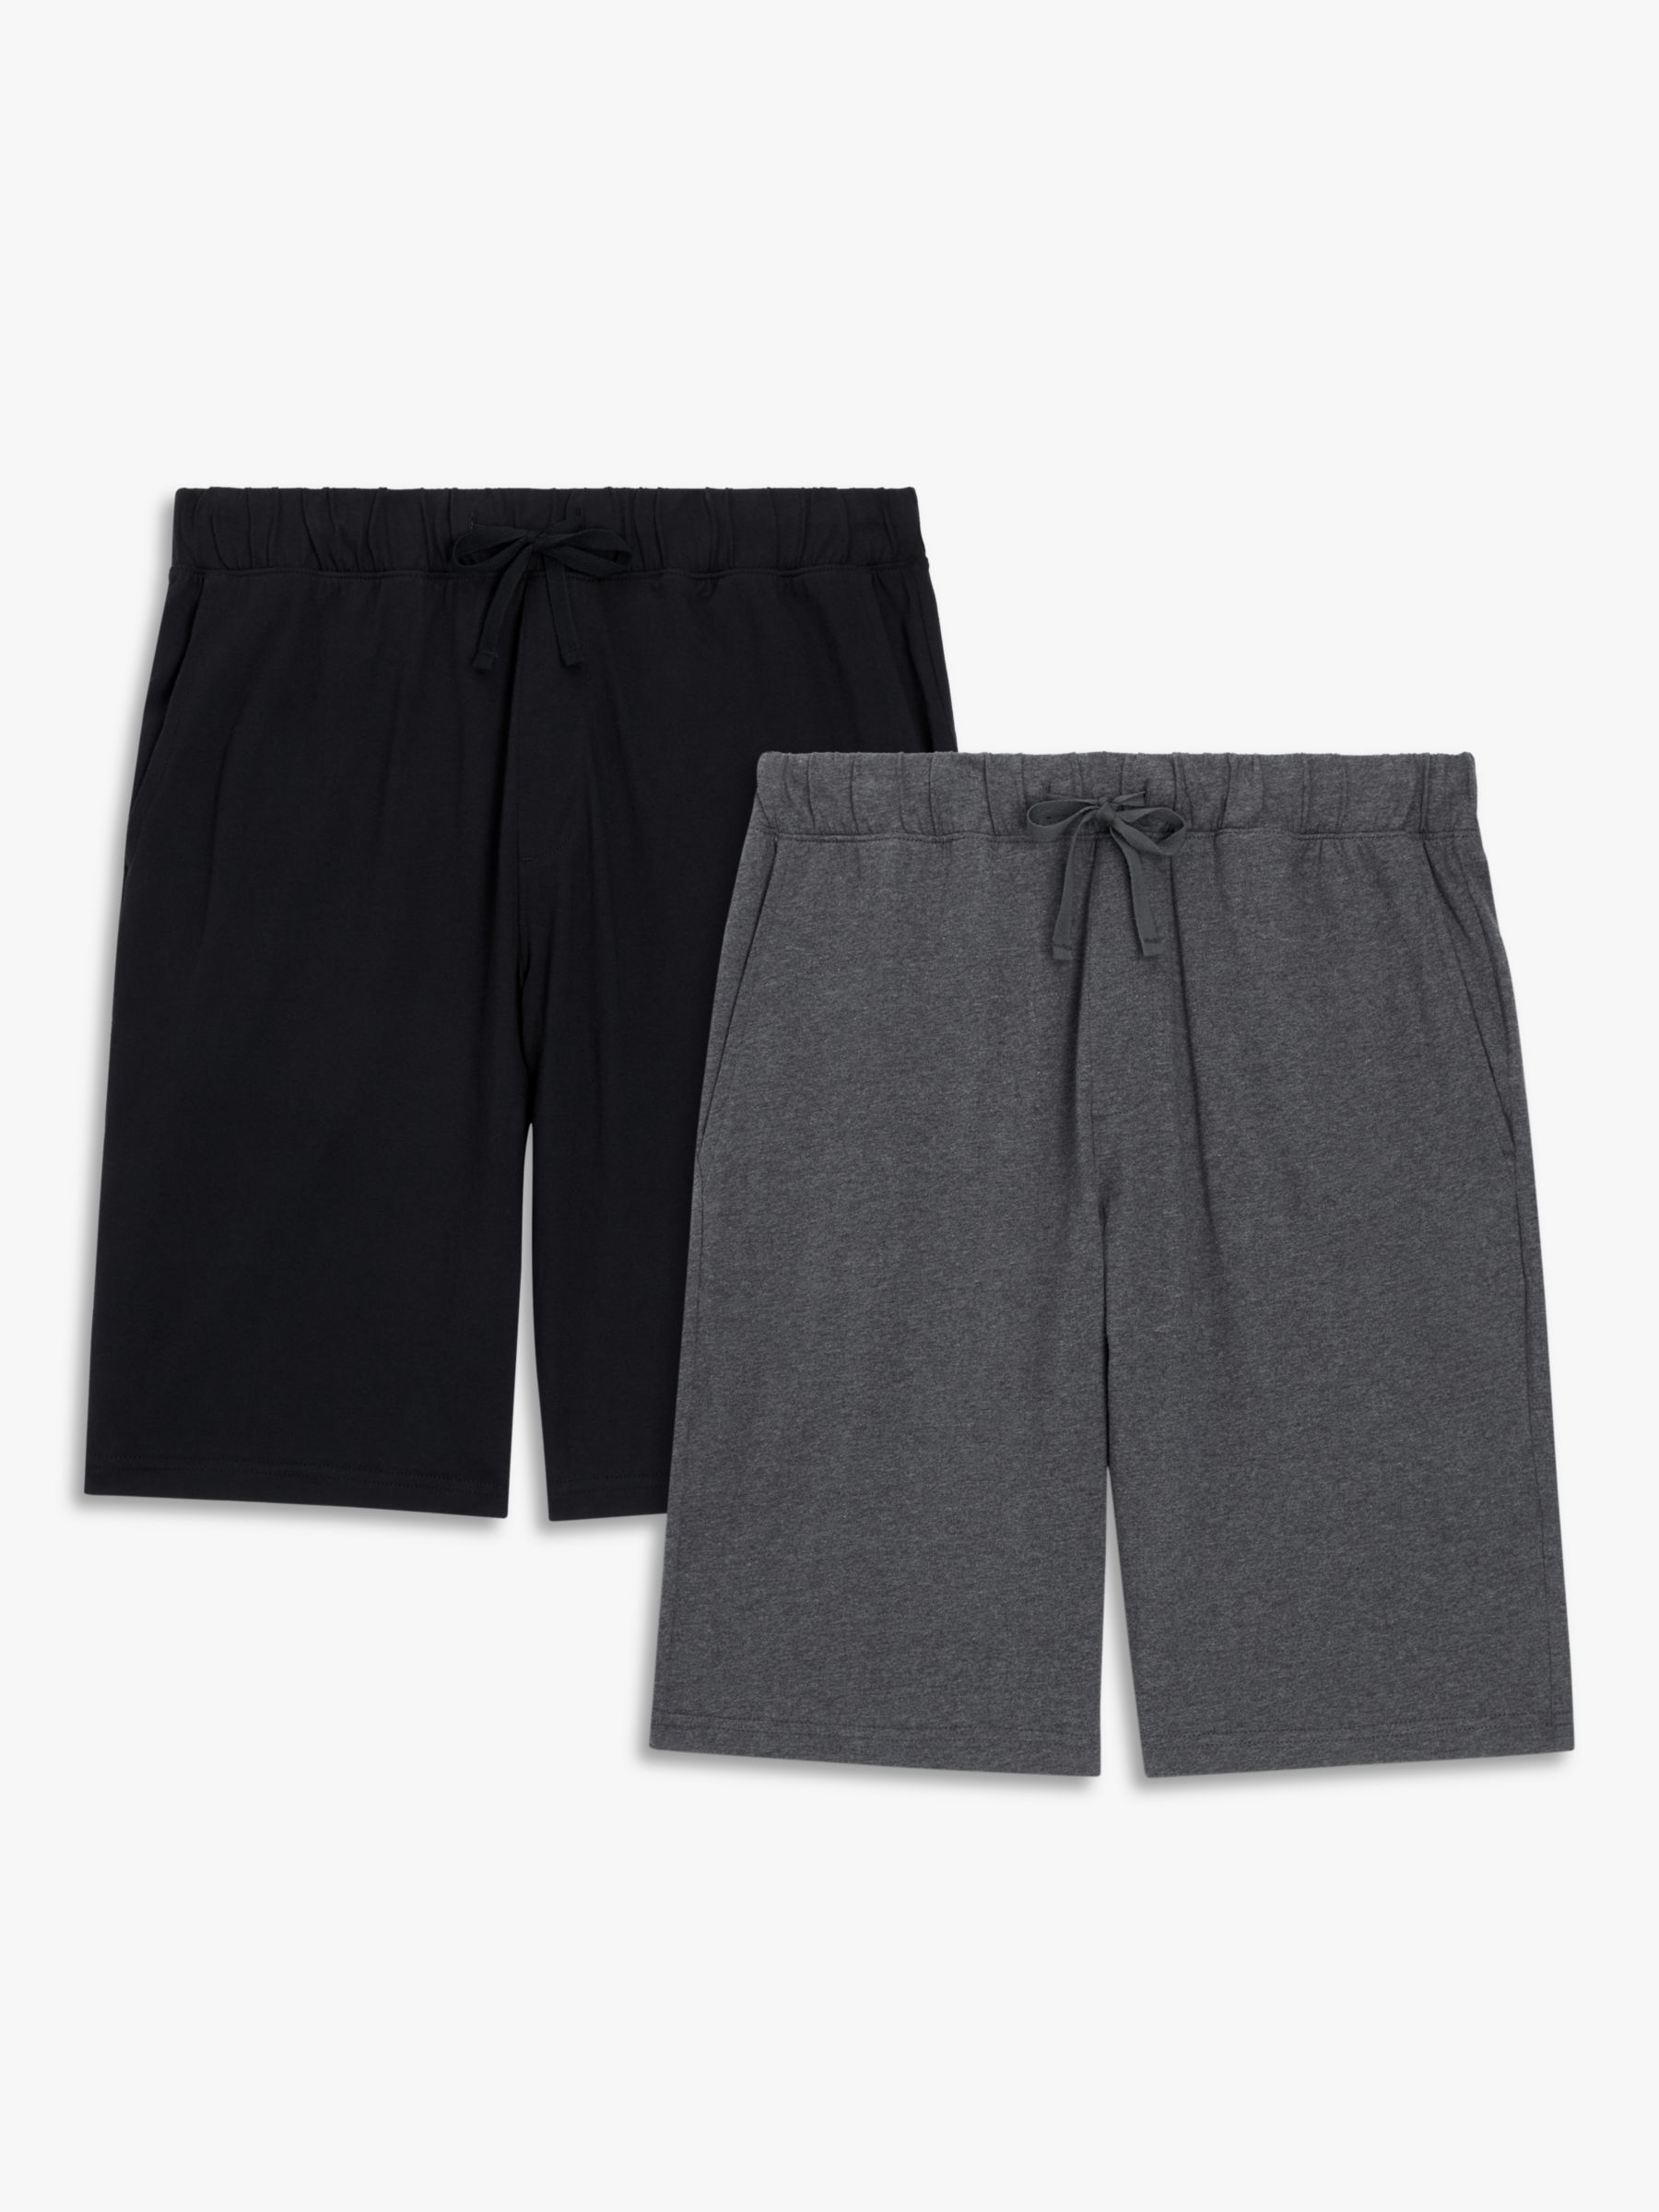 John Lewis ANYDAY Cotton Jersey Shorts, Pack of 2, Black/Grey, XL